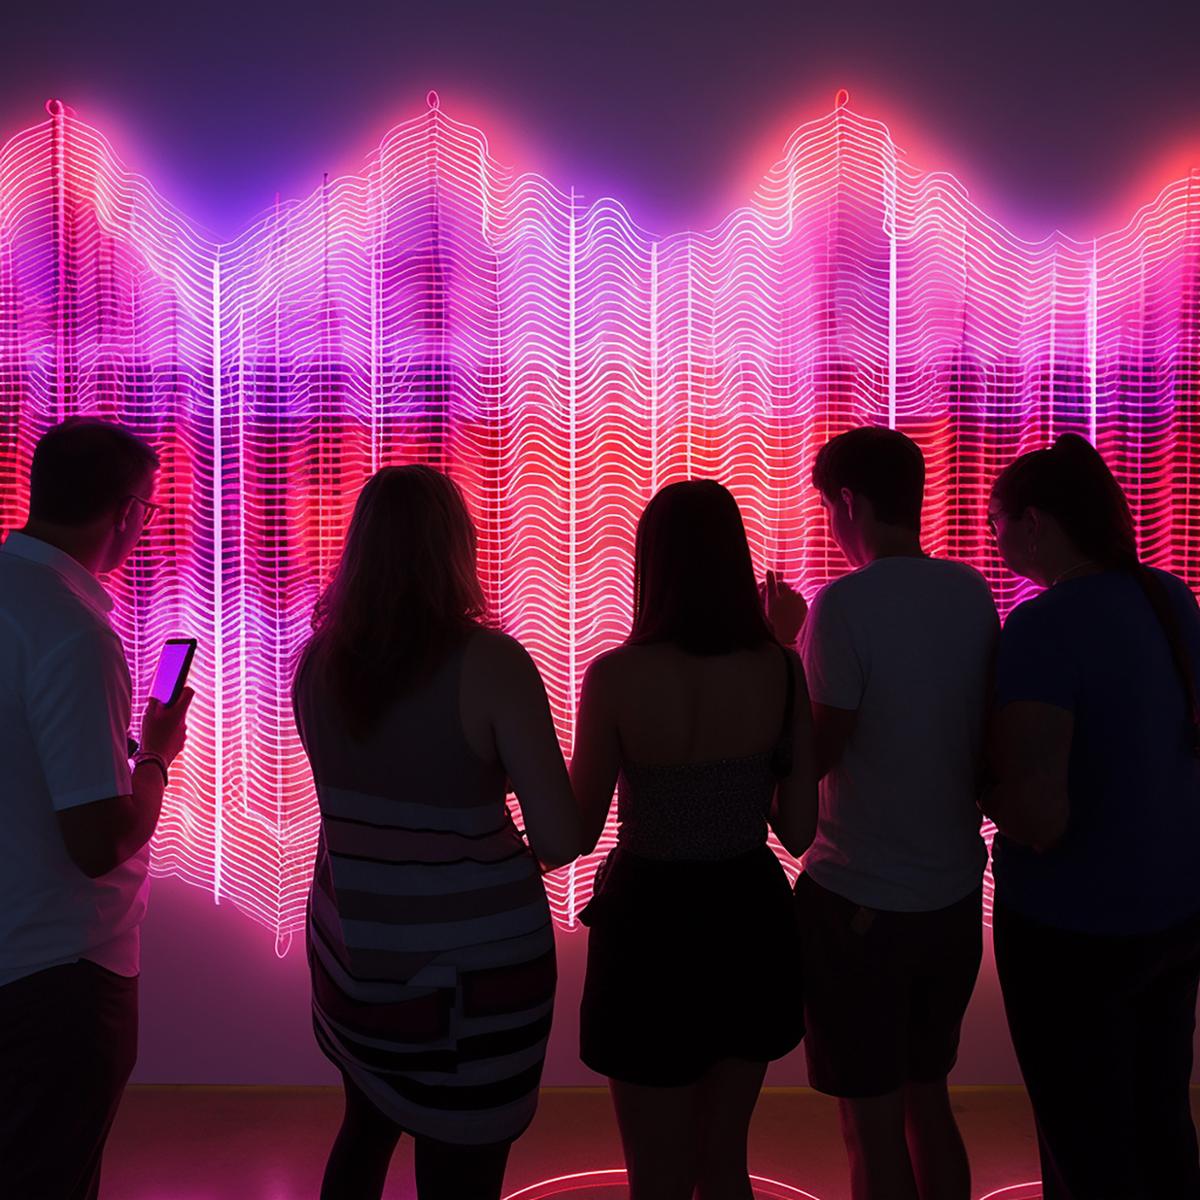 Immersive Art for Wellness: Canadian -Korean artist Krista Kim has created the immersive “Heart Space” installation in Dubai, allowing guests to connect through the universal language of the human heartbeat / Krista Kim